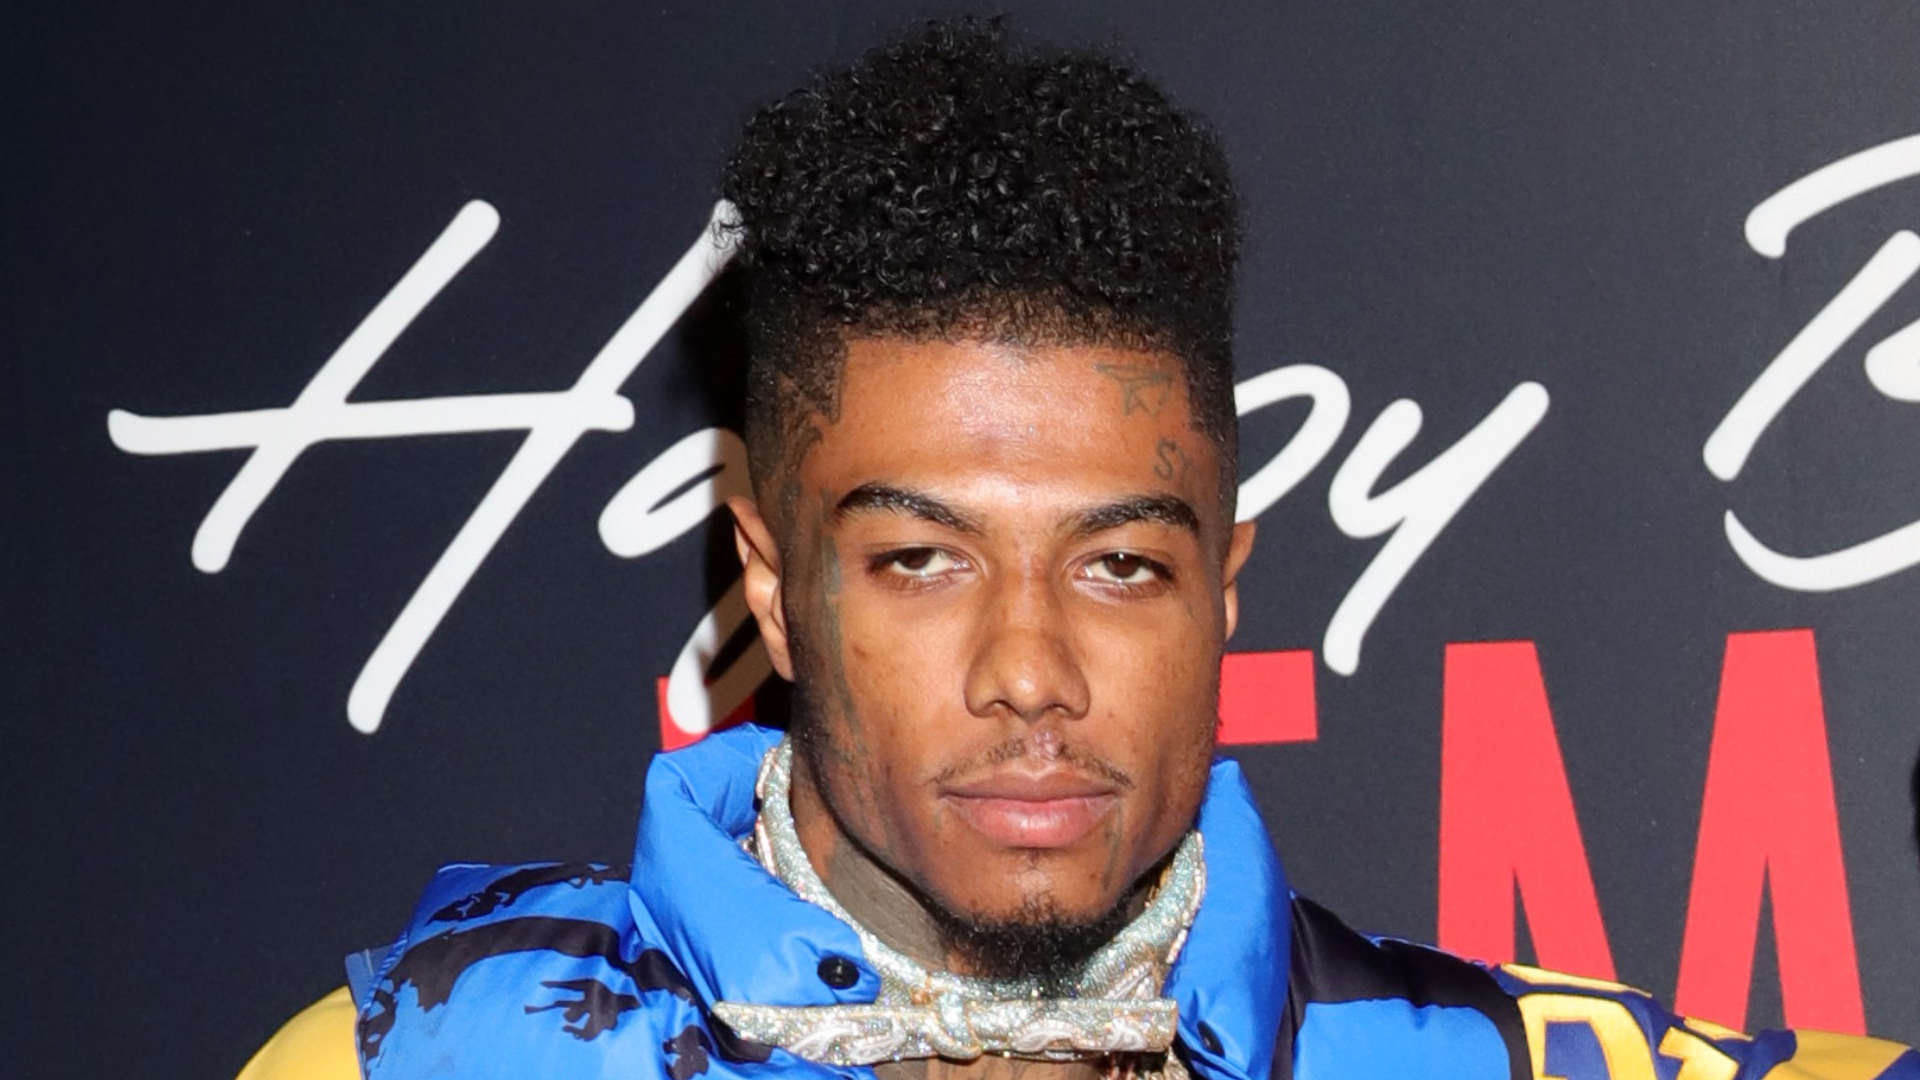 Blueface Arrested on Robbery Charges While on His Way to Court | Complex